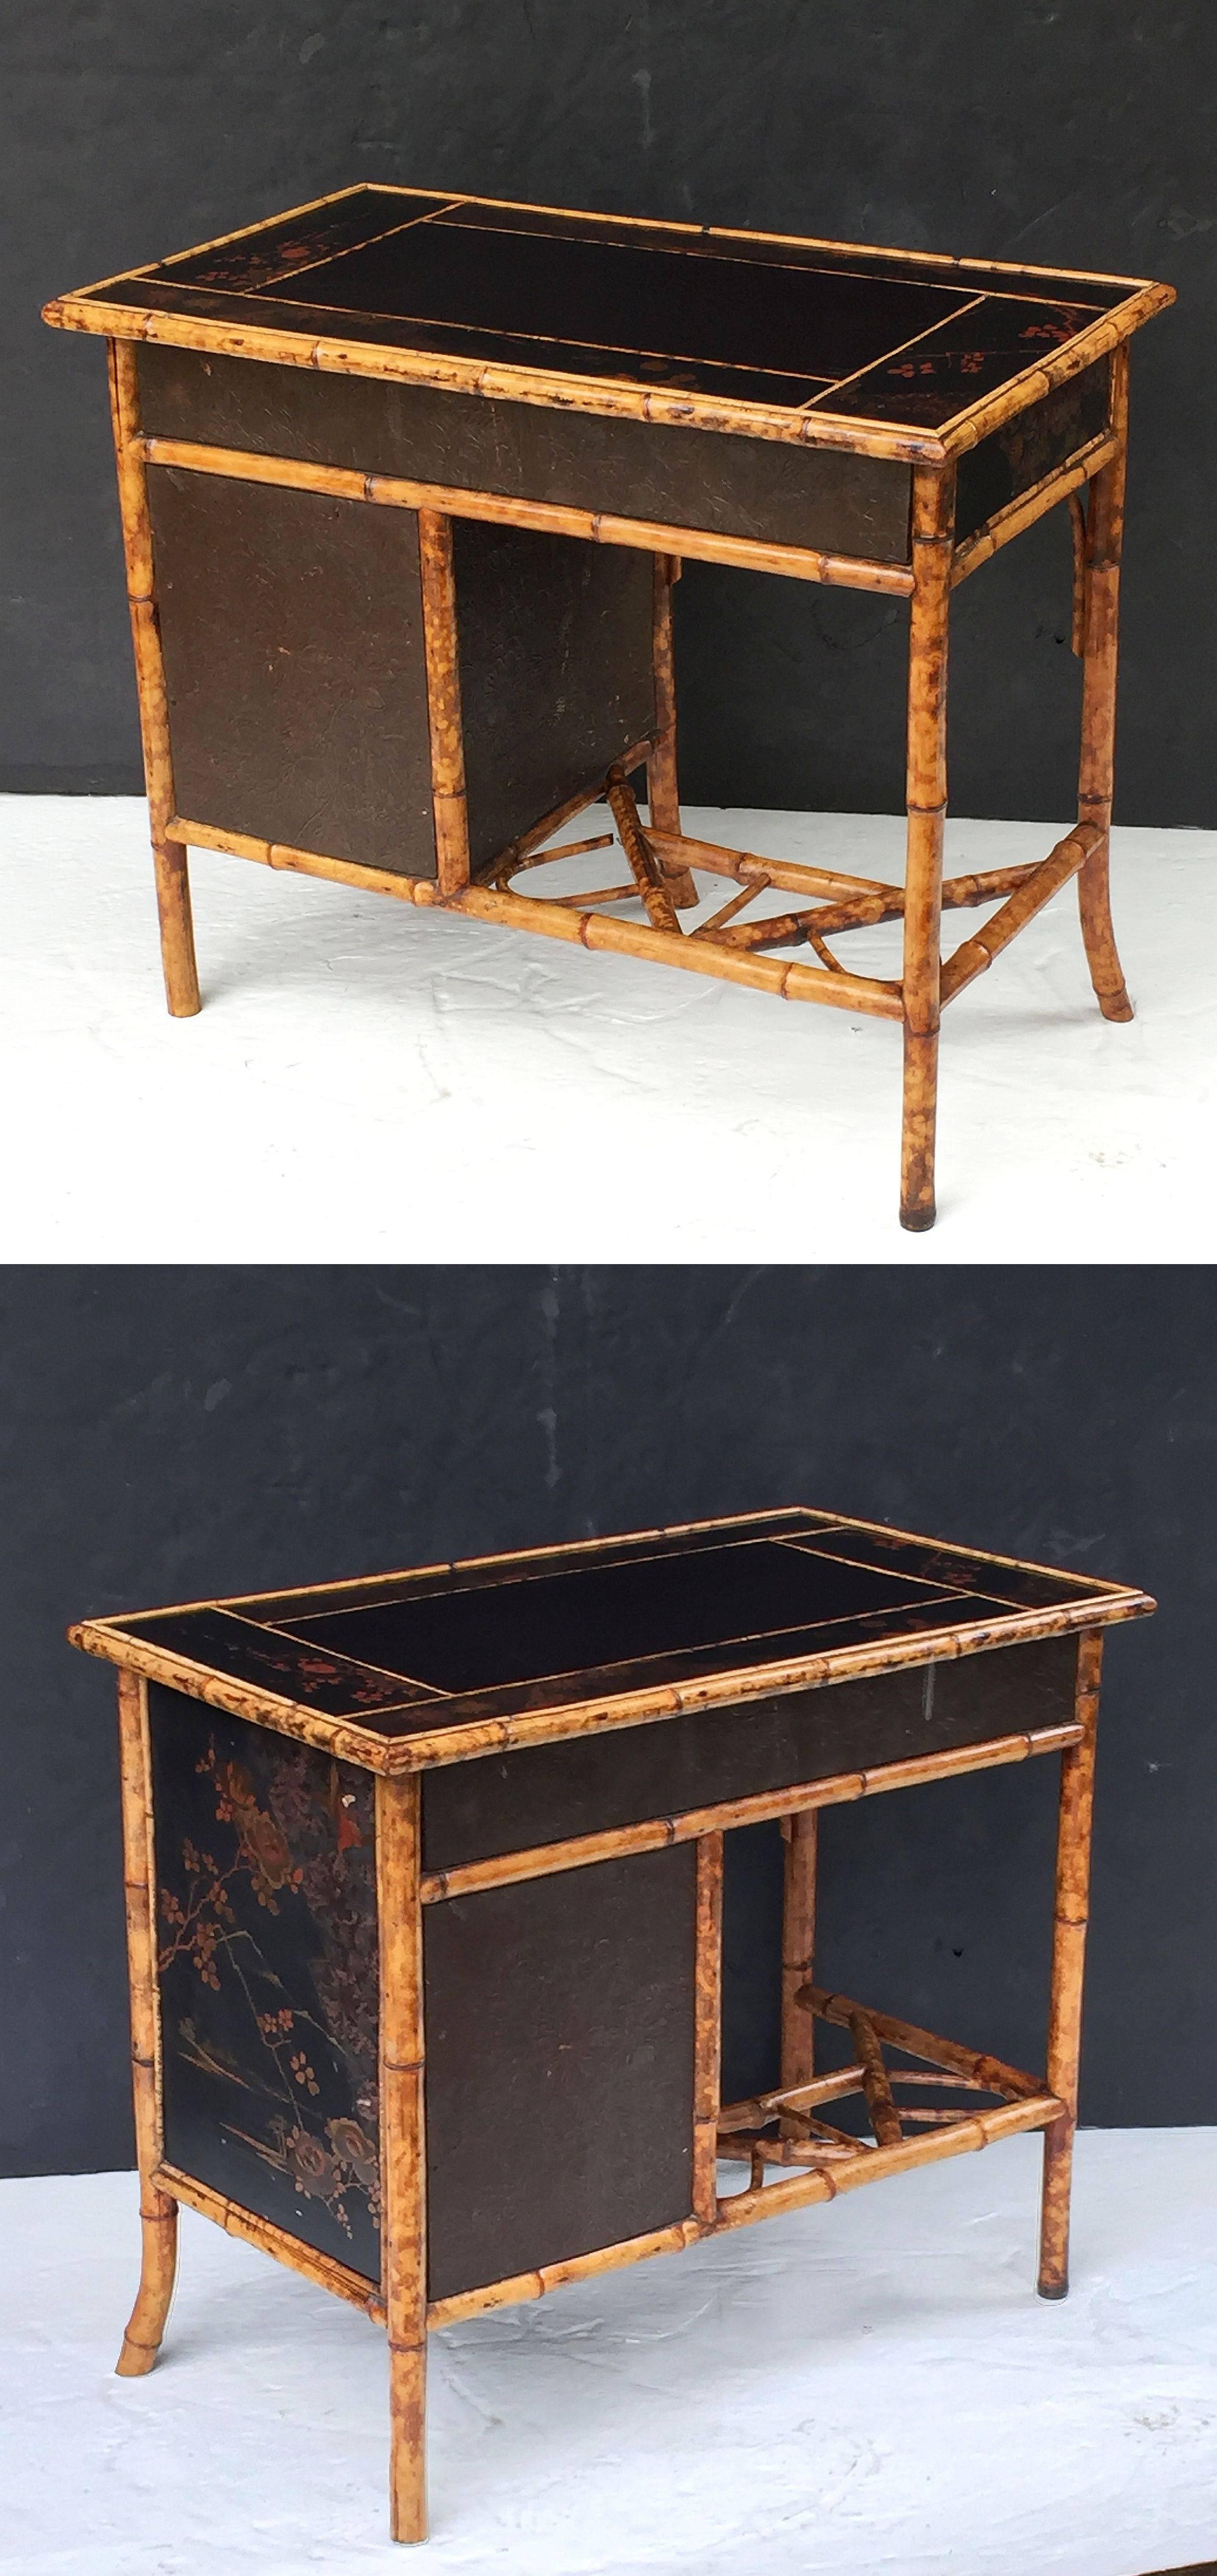 19th Century English Bamboo Writing Desk with Leather Top and Lacquered Sides